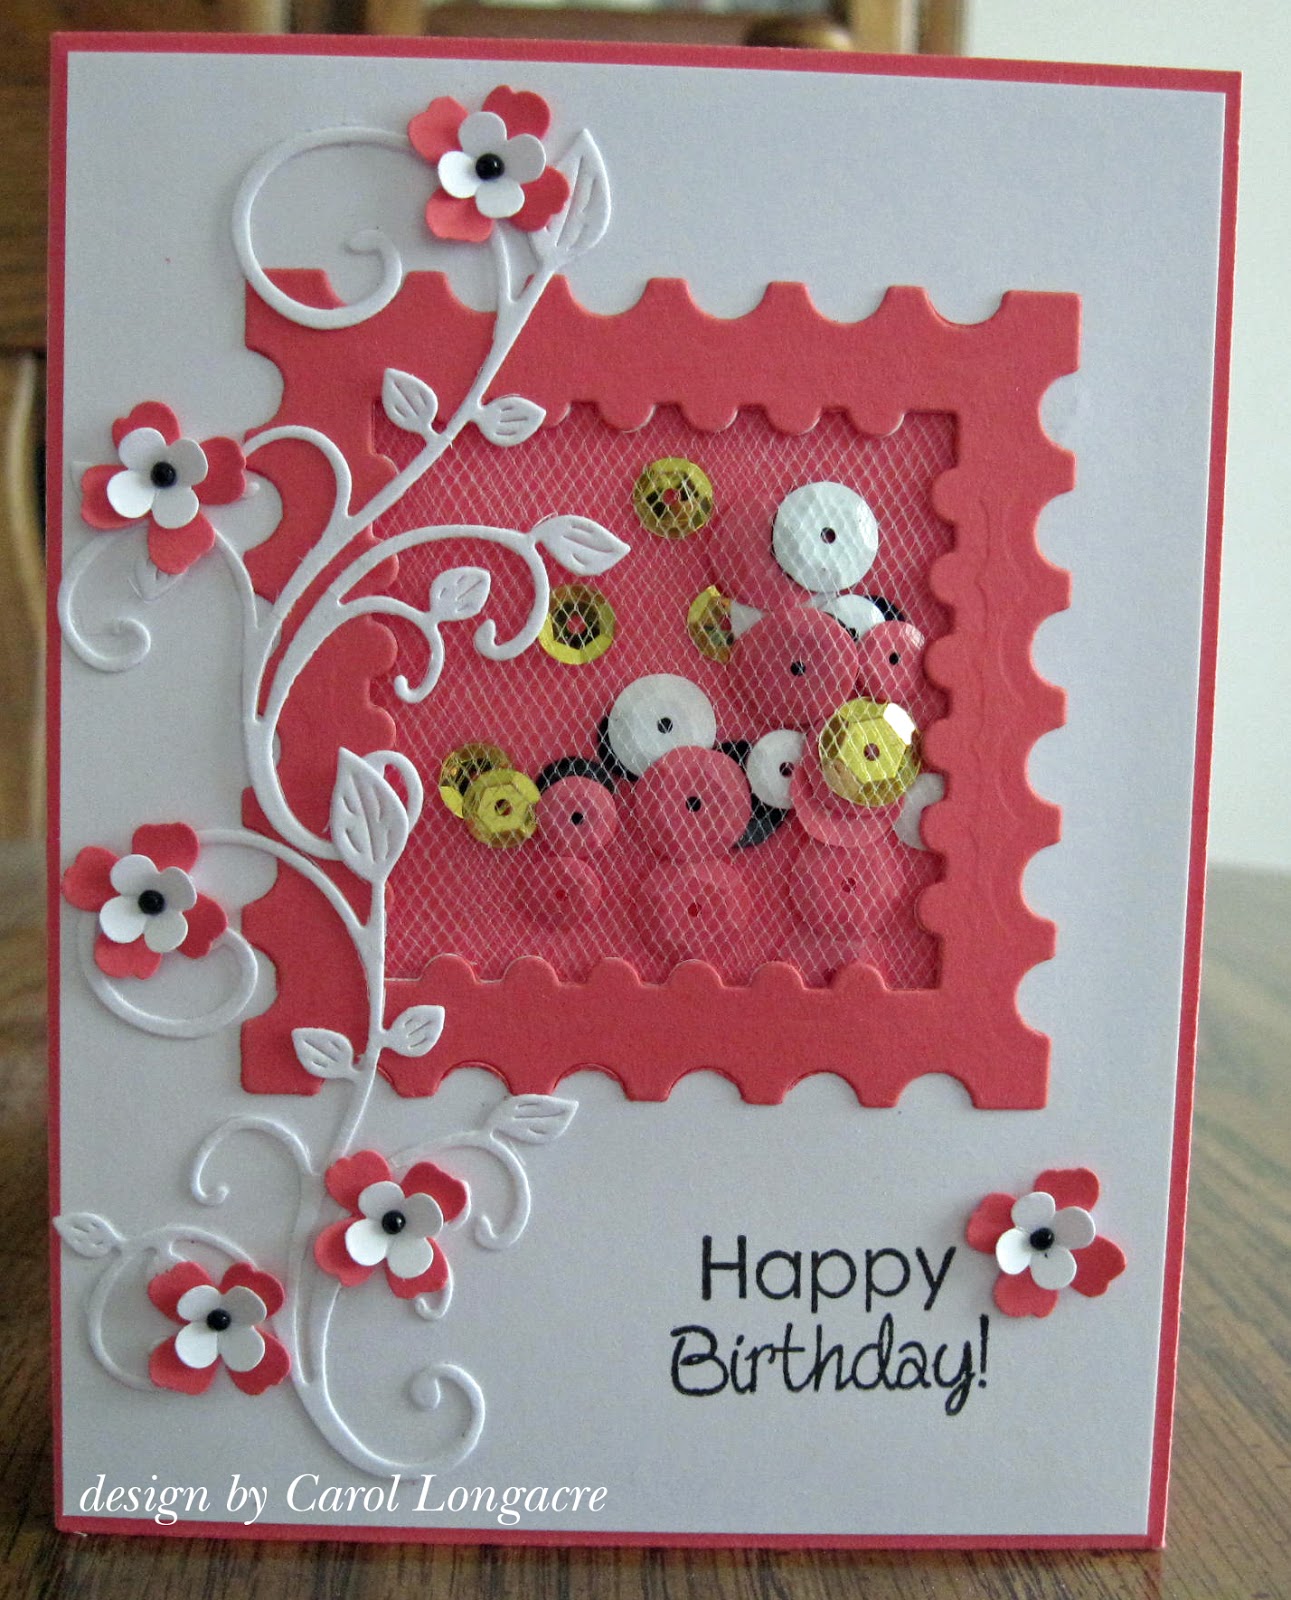 Our Little Inspirations: Shaker Birthday Card